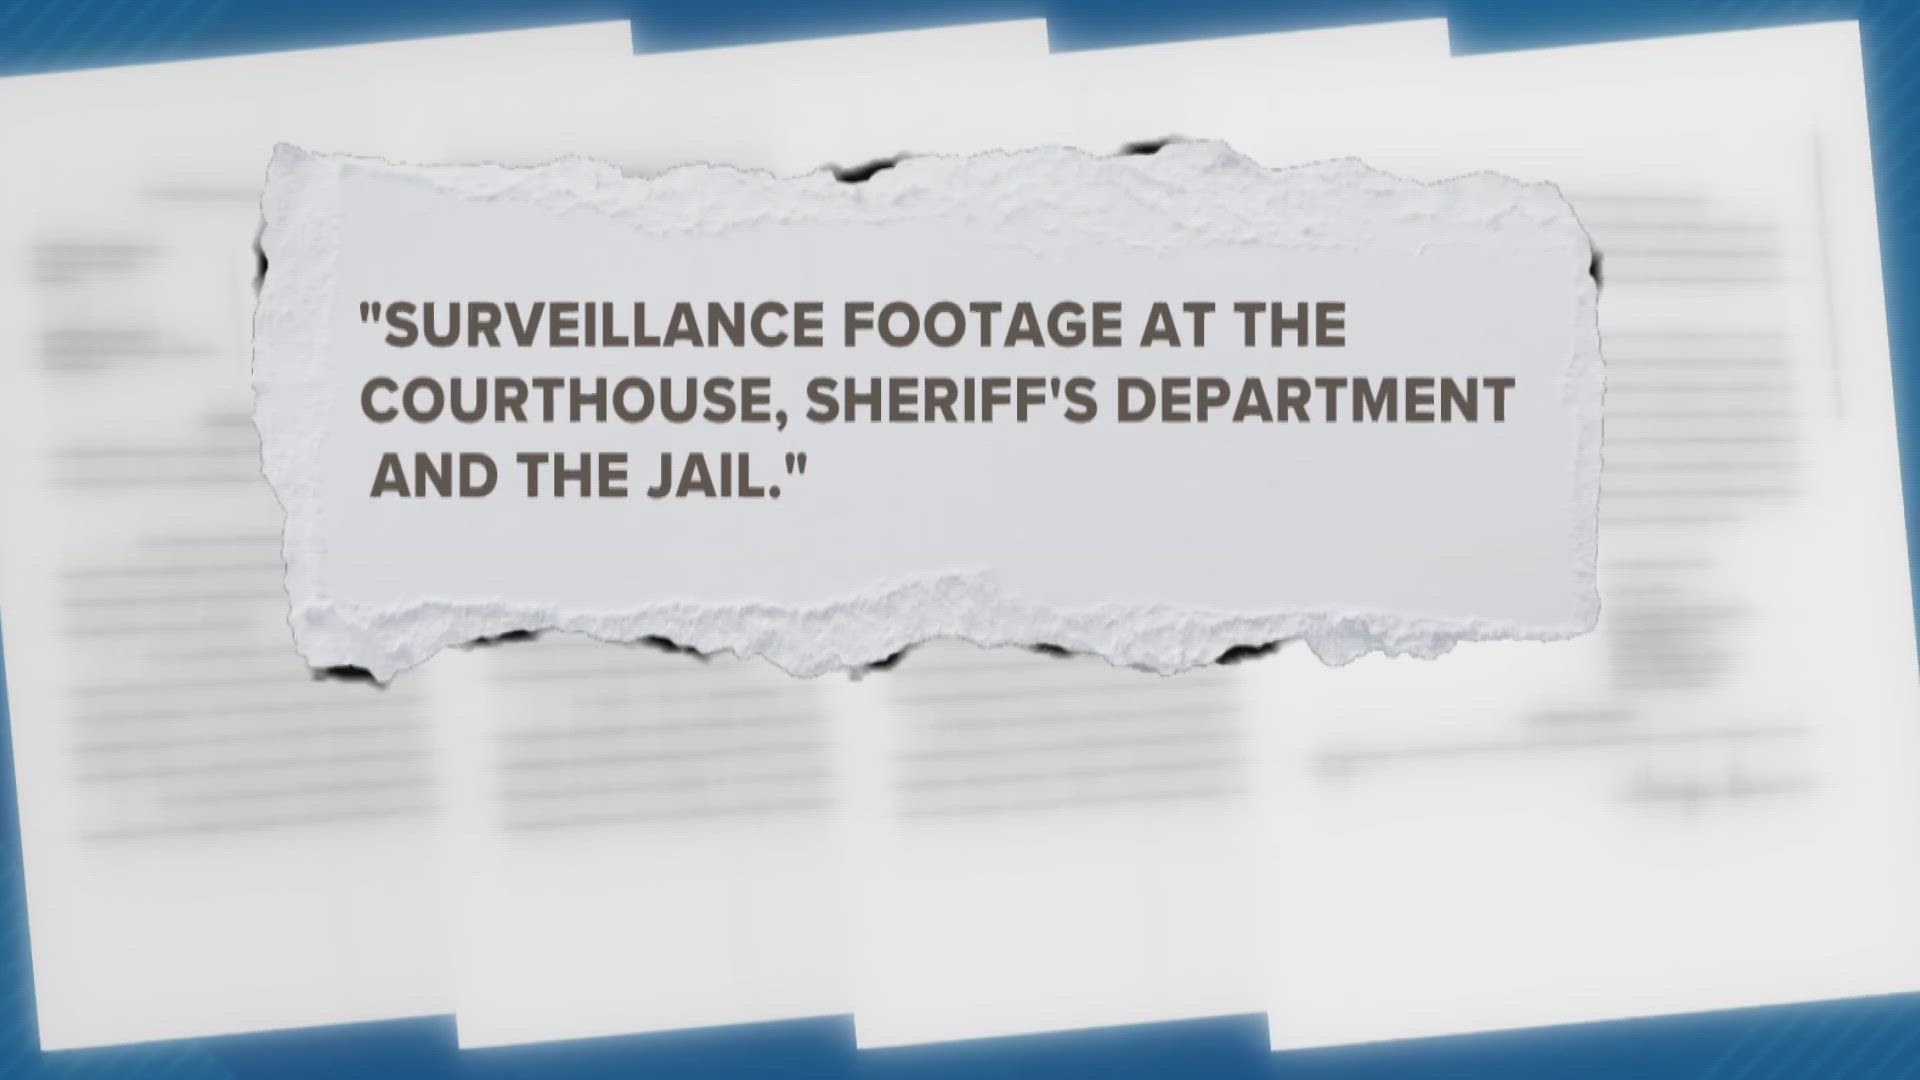 Sheriff Jeff Burkett was not allowing county officials to have access to surveillance footage at the courthouse, jail and sheriff's department.